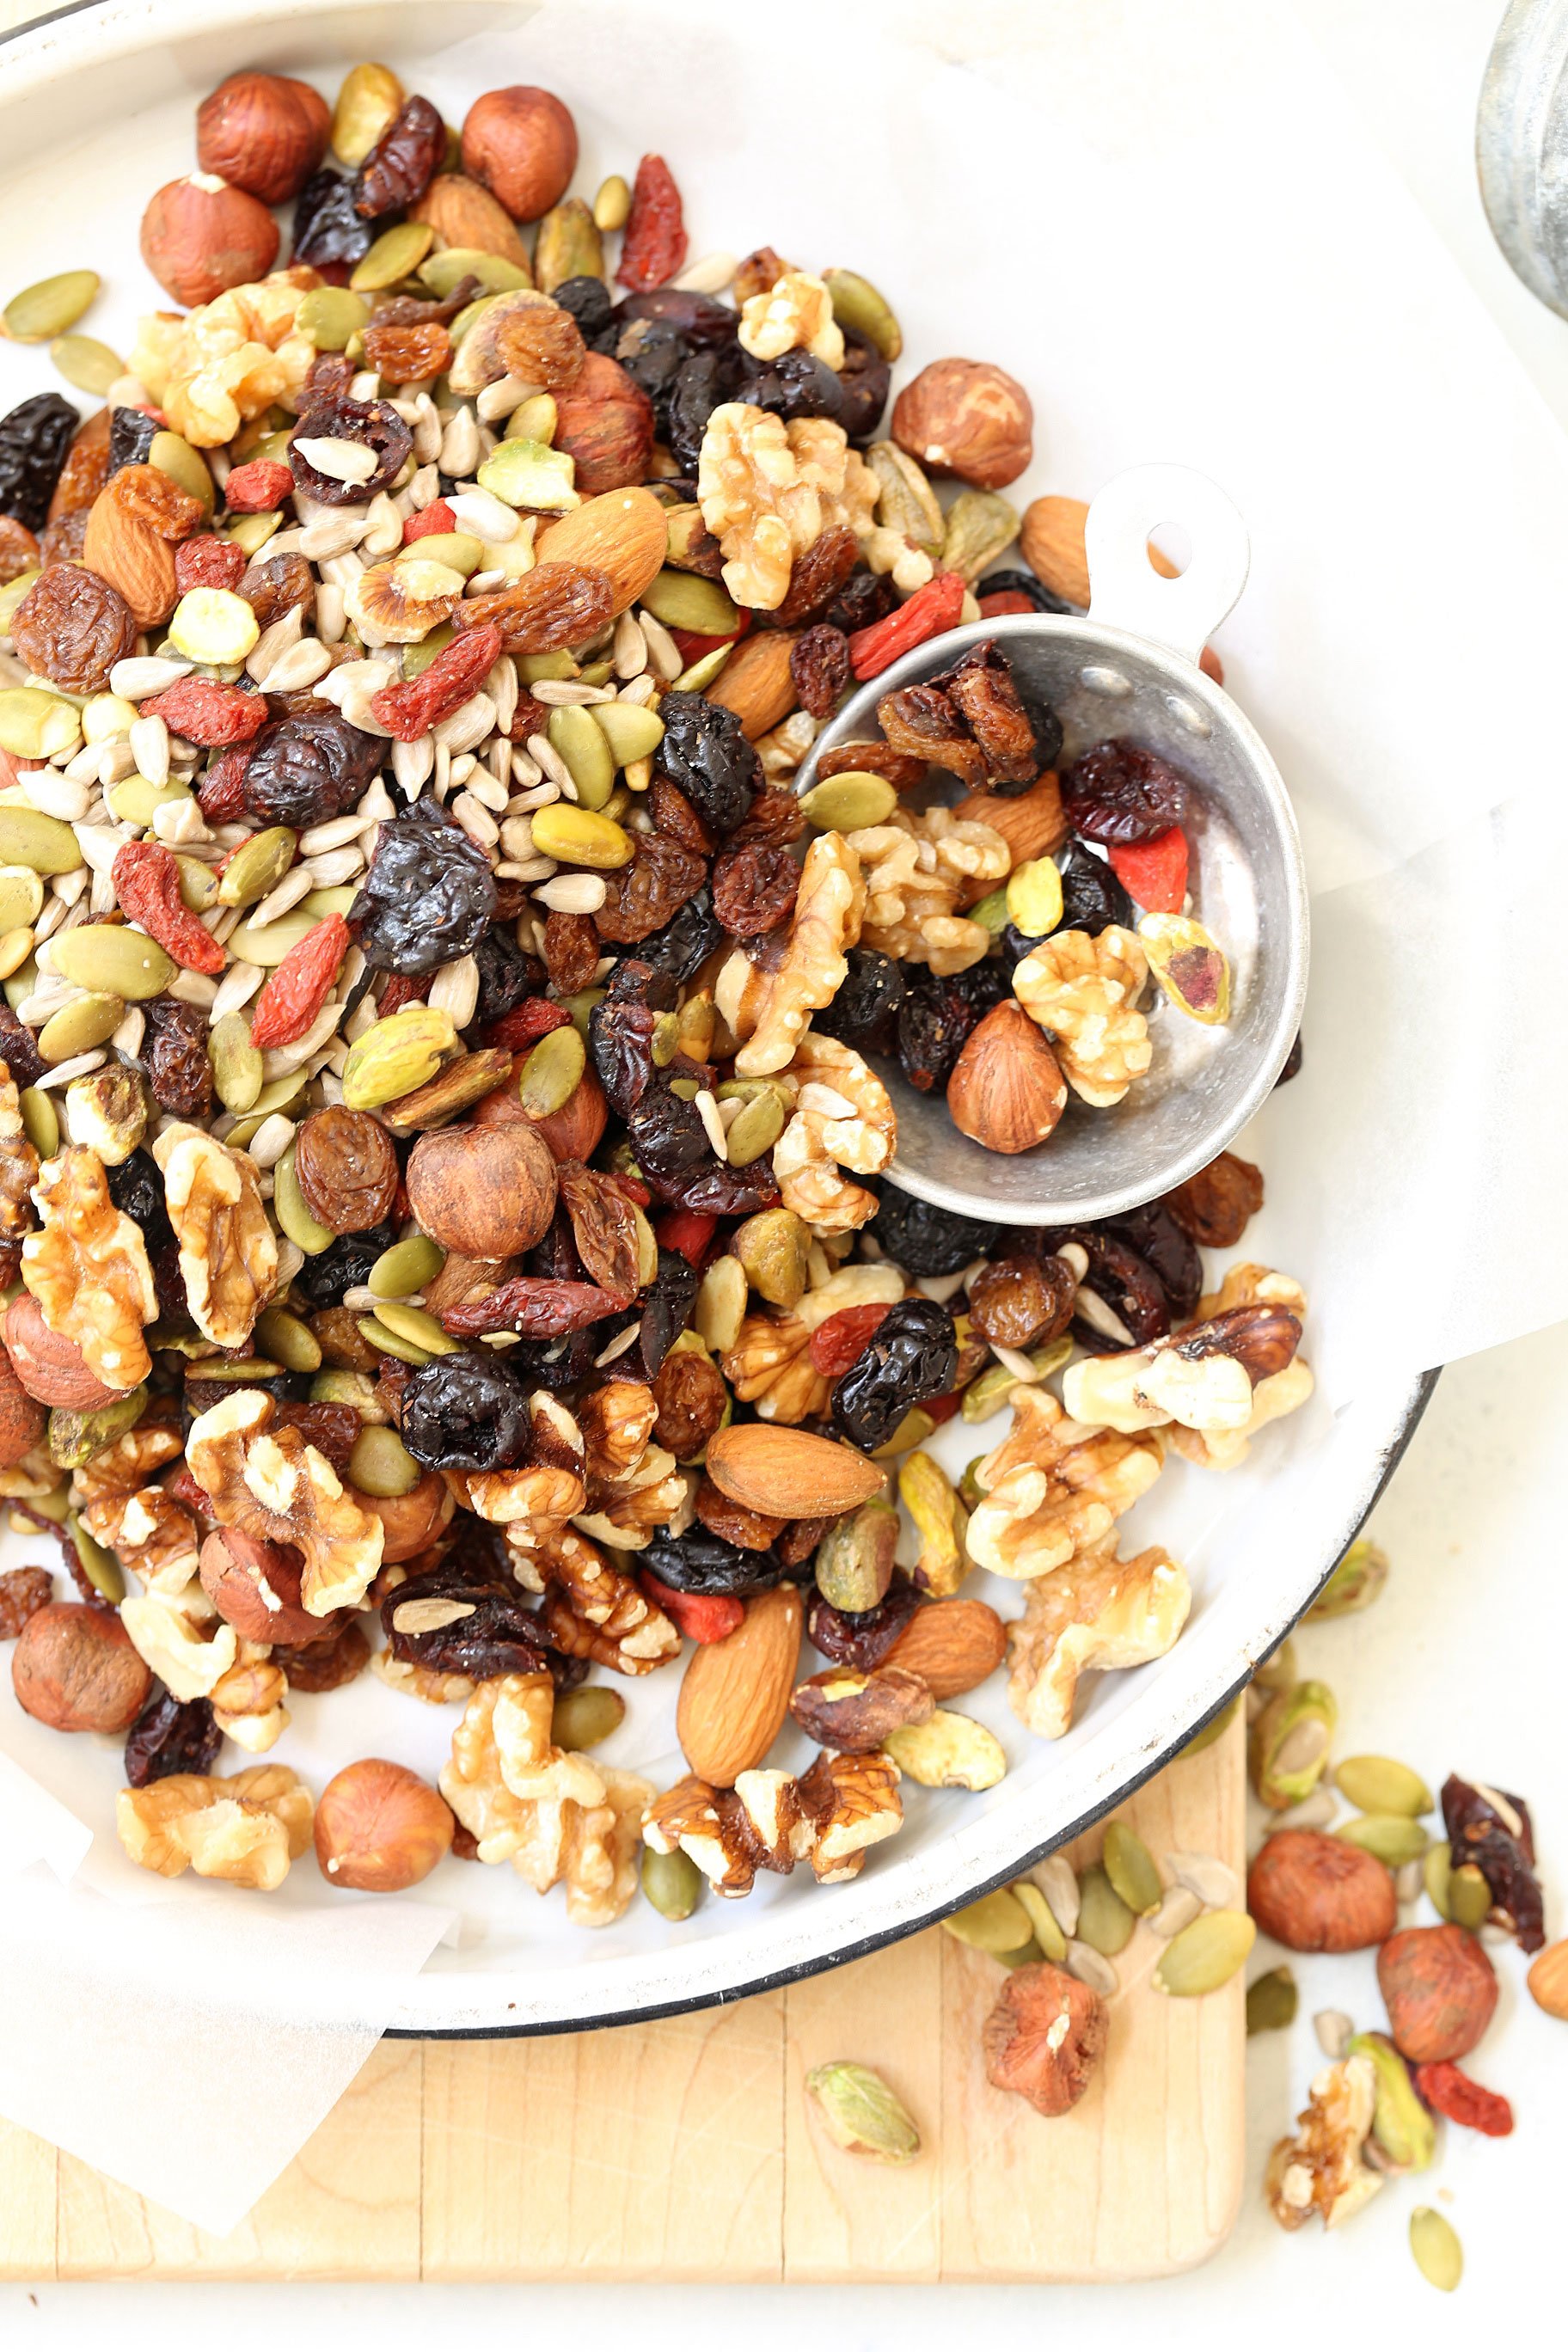 This homemade Healthy Trail Mix is a balanced blend of nuts, seeds and dried fruits without any added sugar